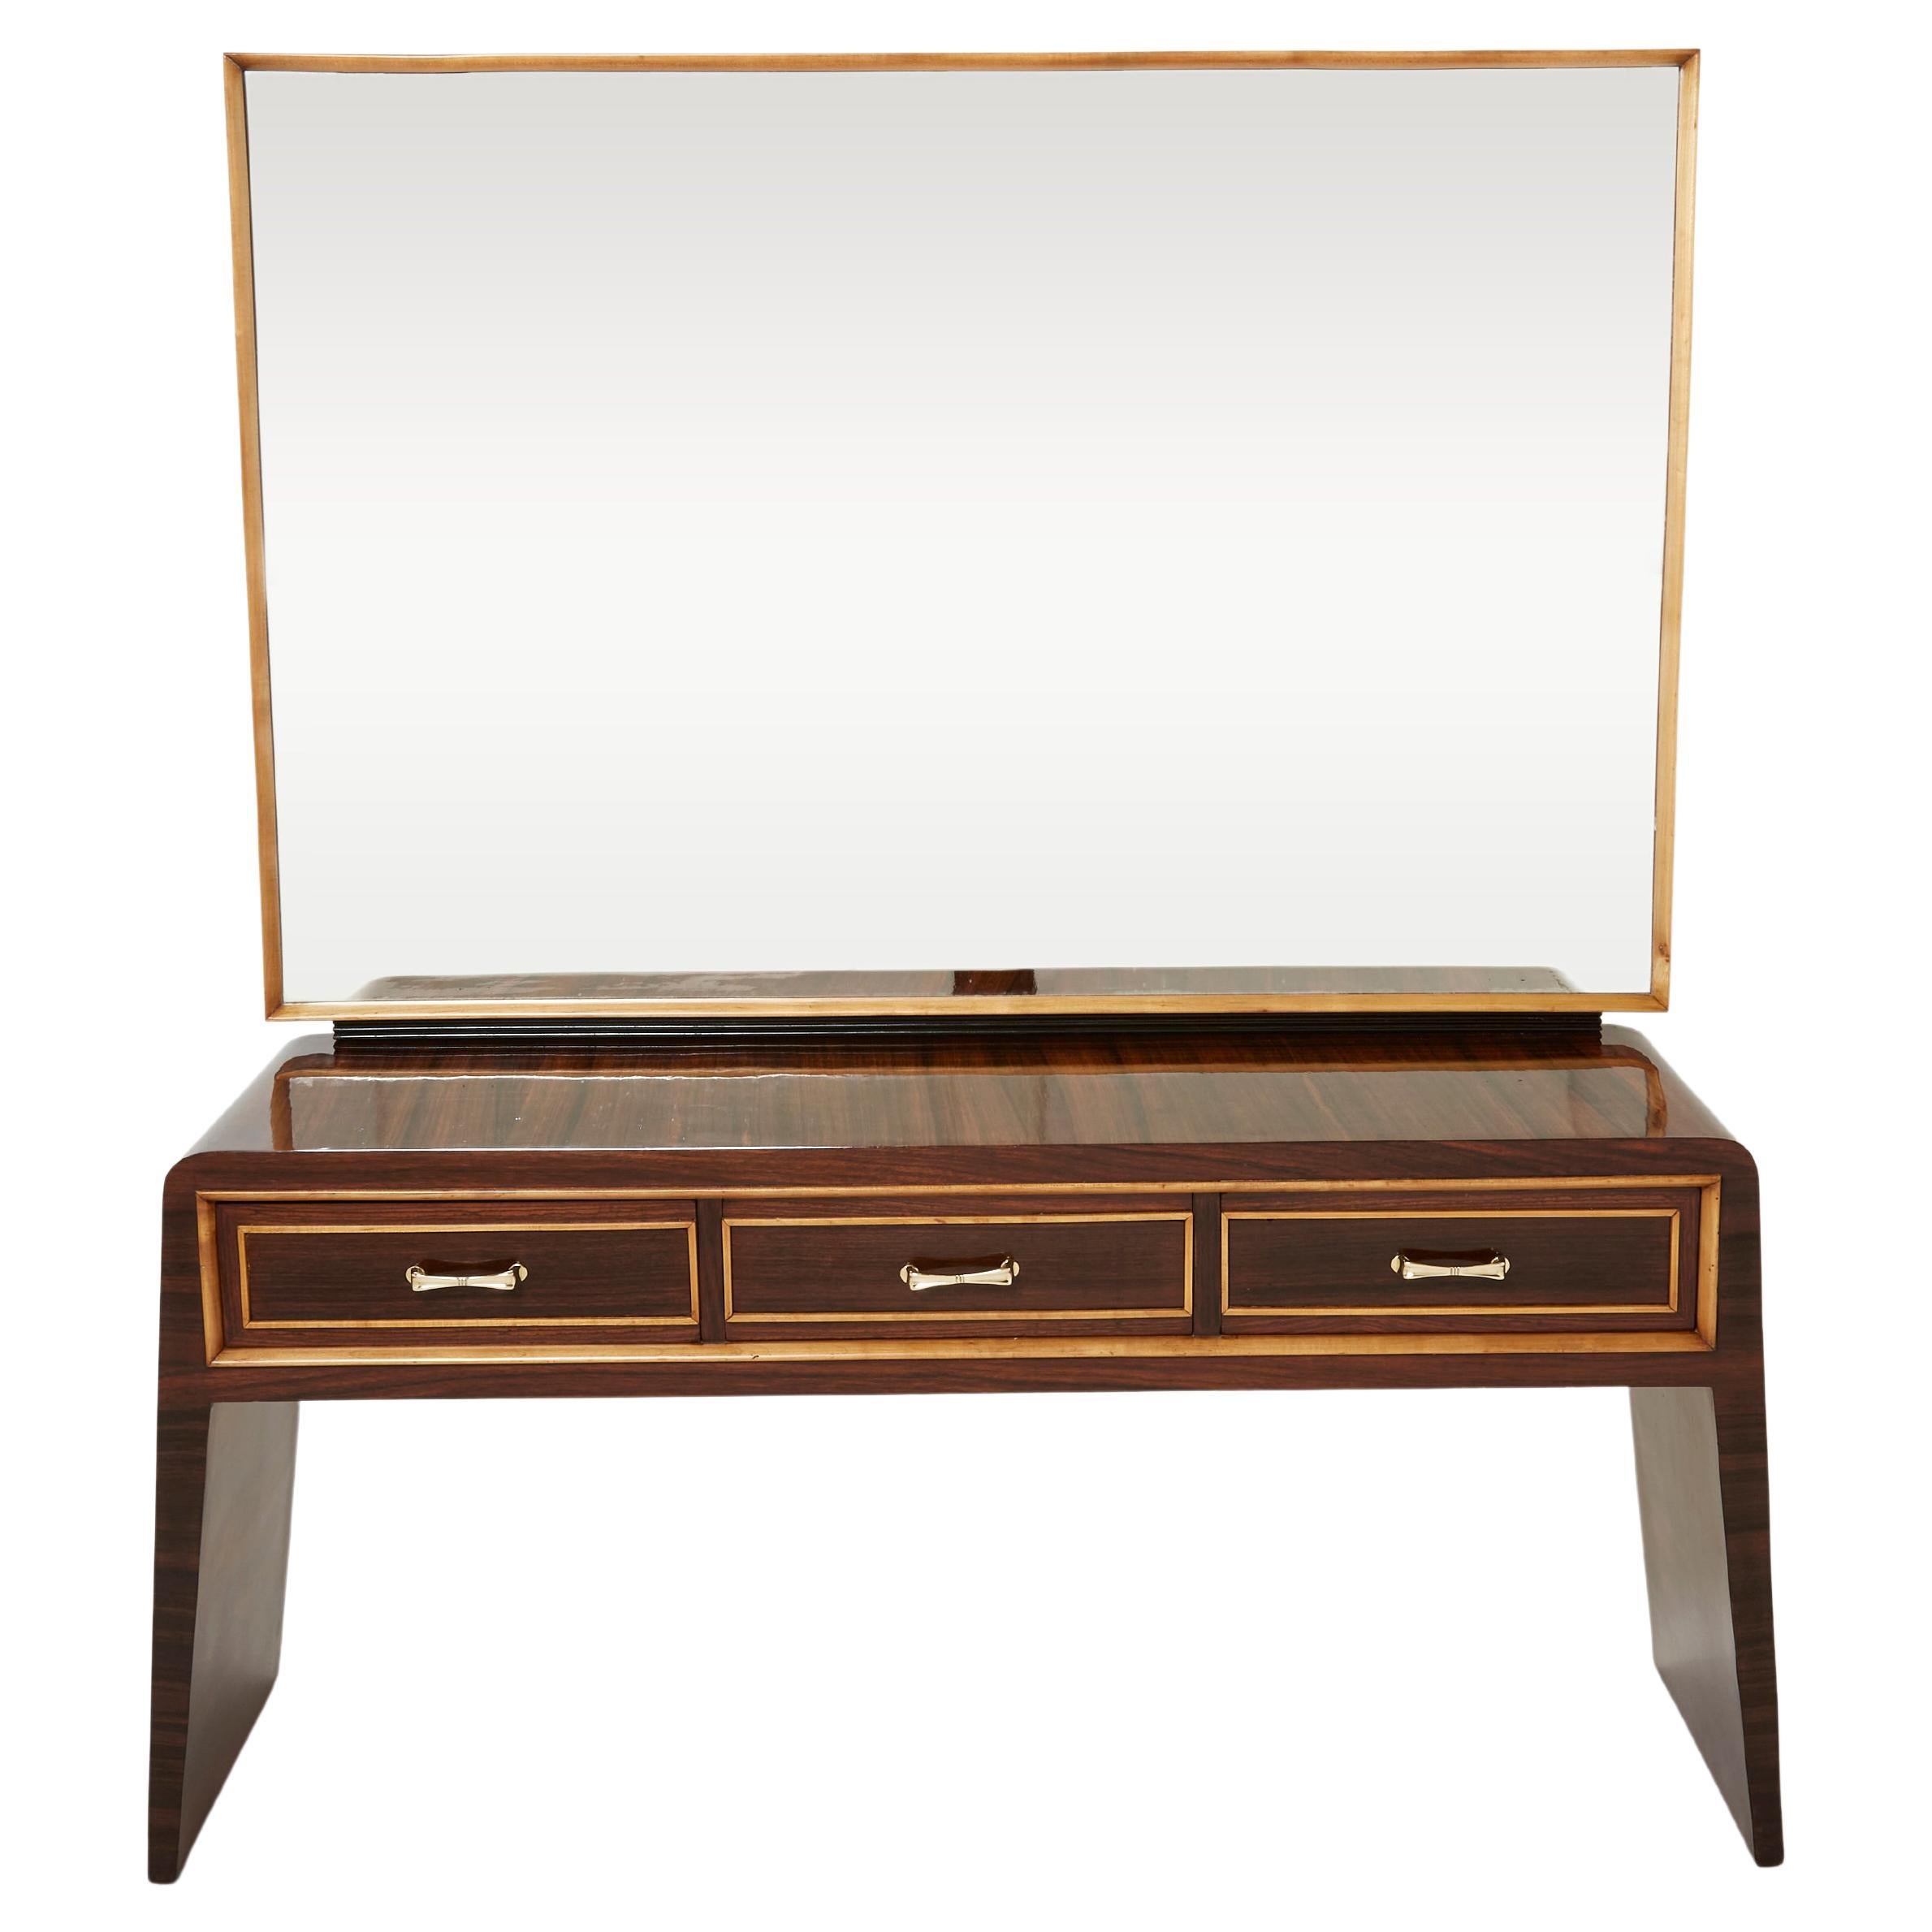 Paolo Buffa Rosewood Sycamore and Brass Console Vanity, 1940s For Sale